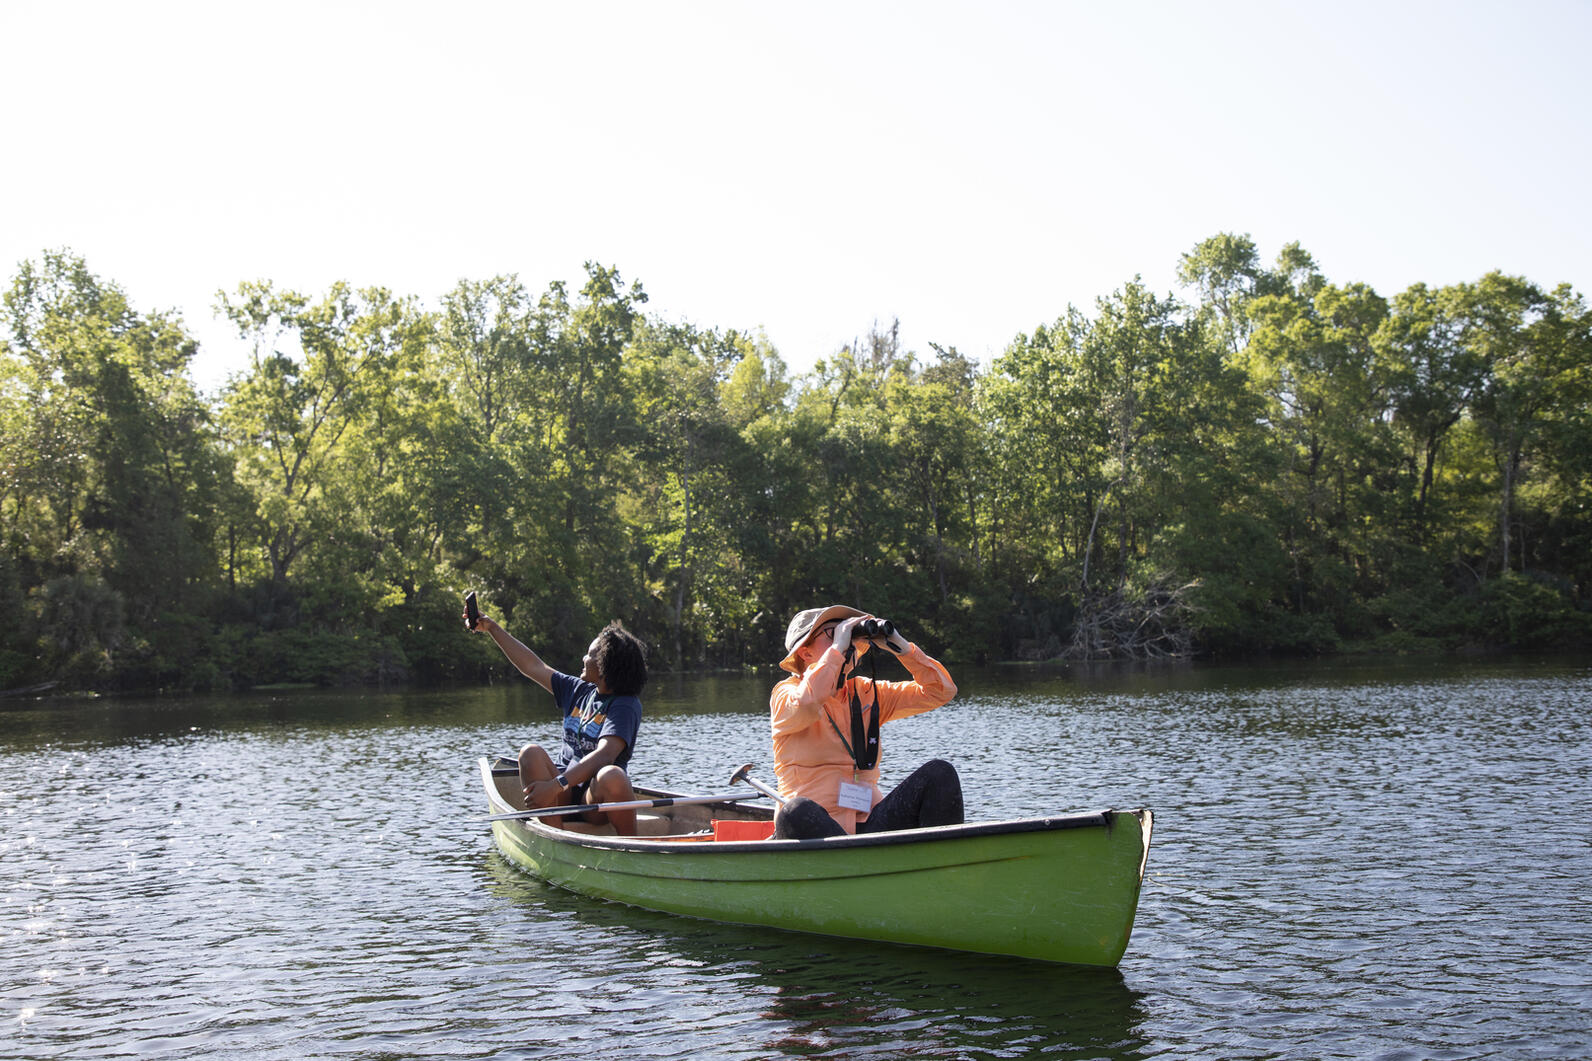 2 young people in a kayak on a lake. The person in the front is using binoculars while the person in the back is taking a selfie. 